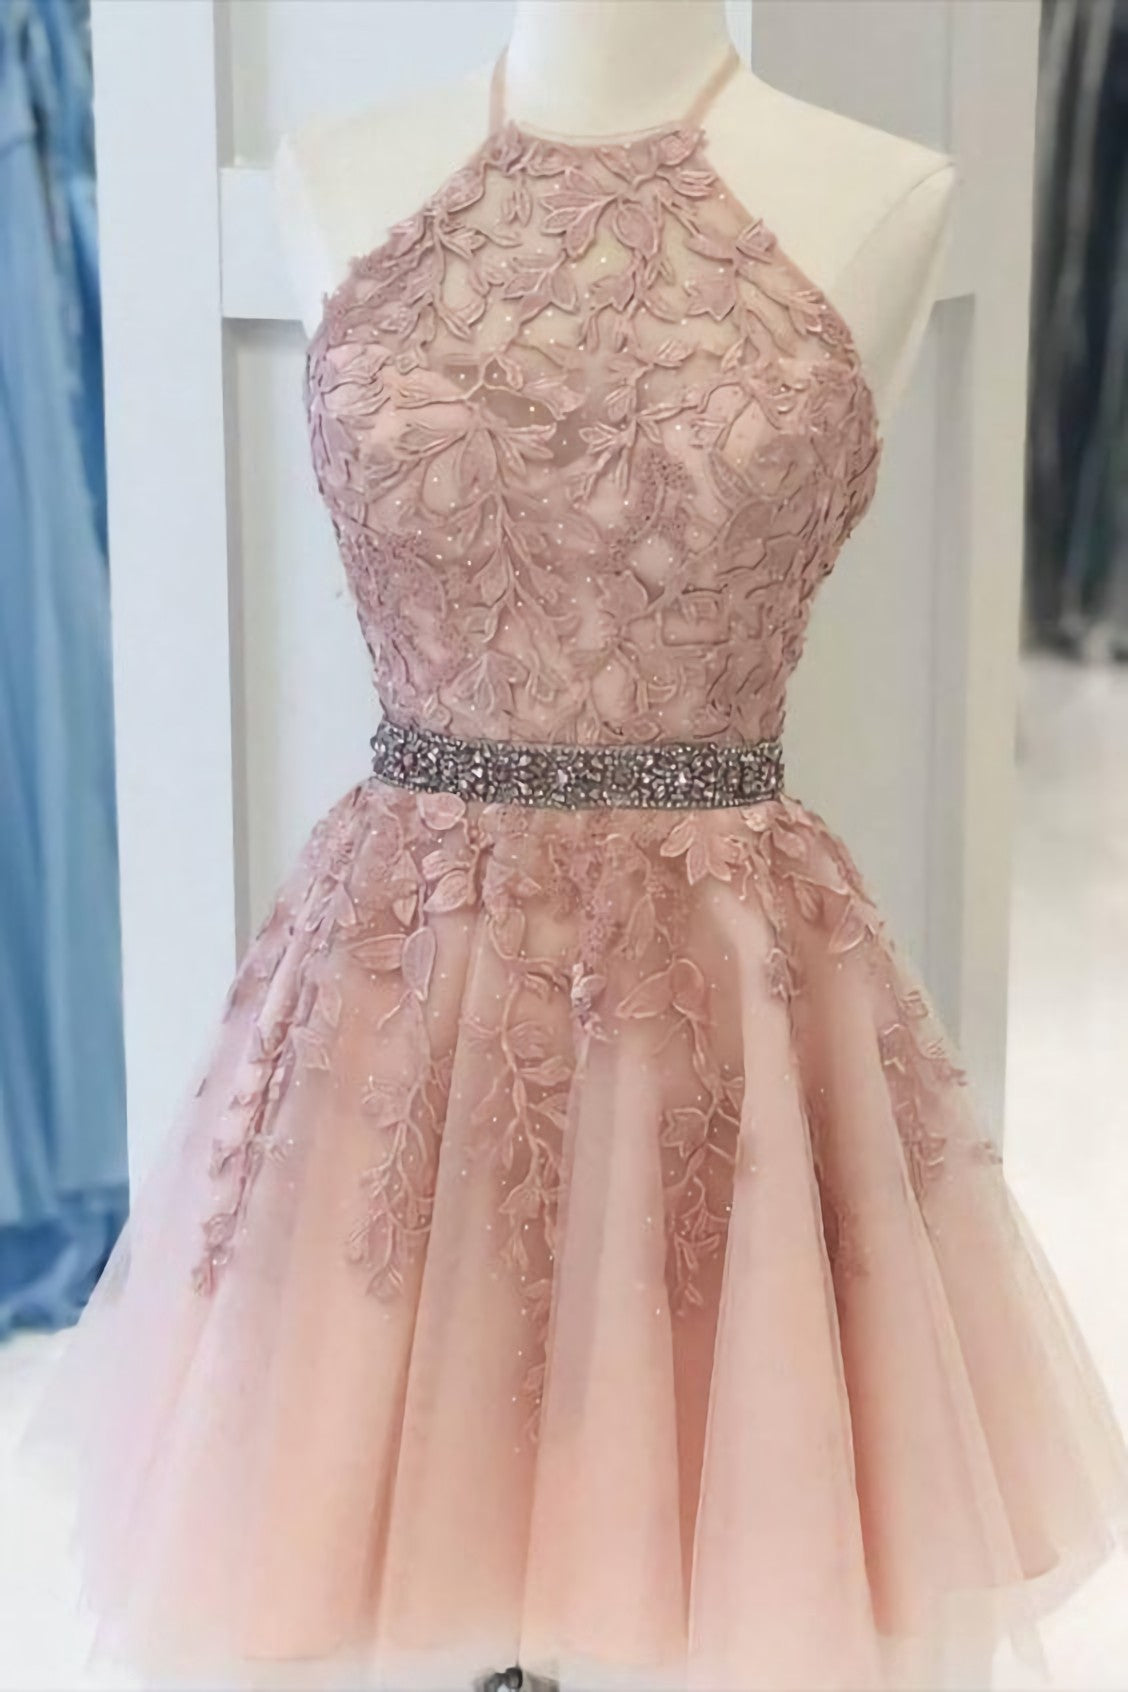 Pink Halter Appliqued Corset Homecoming Dress, With Beading Belt outfits, Prom Dressed A Line